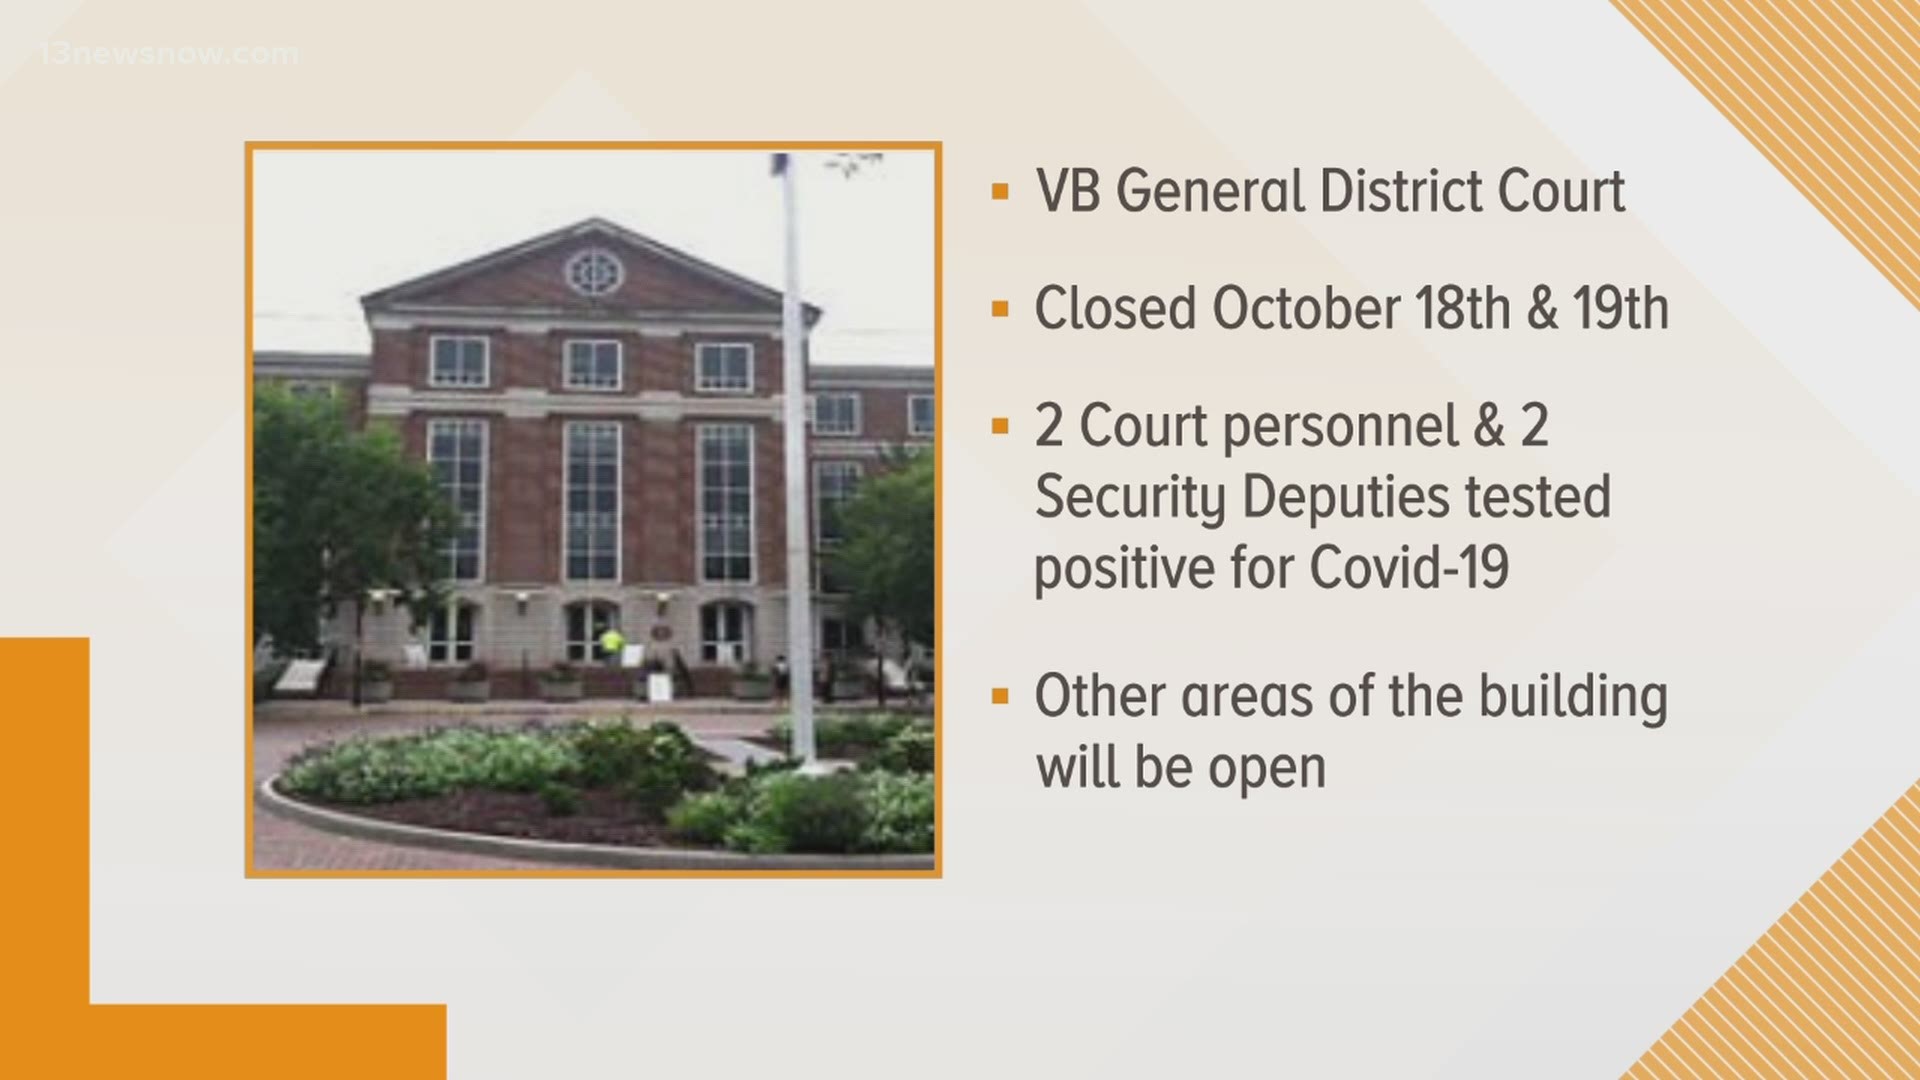 Four personnel tested positive for COVID-19 forcing officials to close Virginia Beach General District Court for a few days.